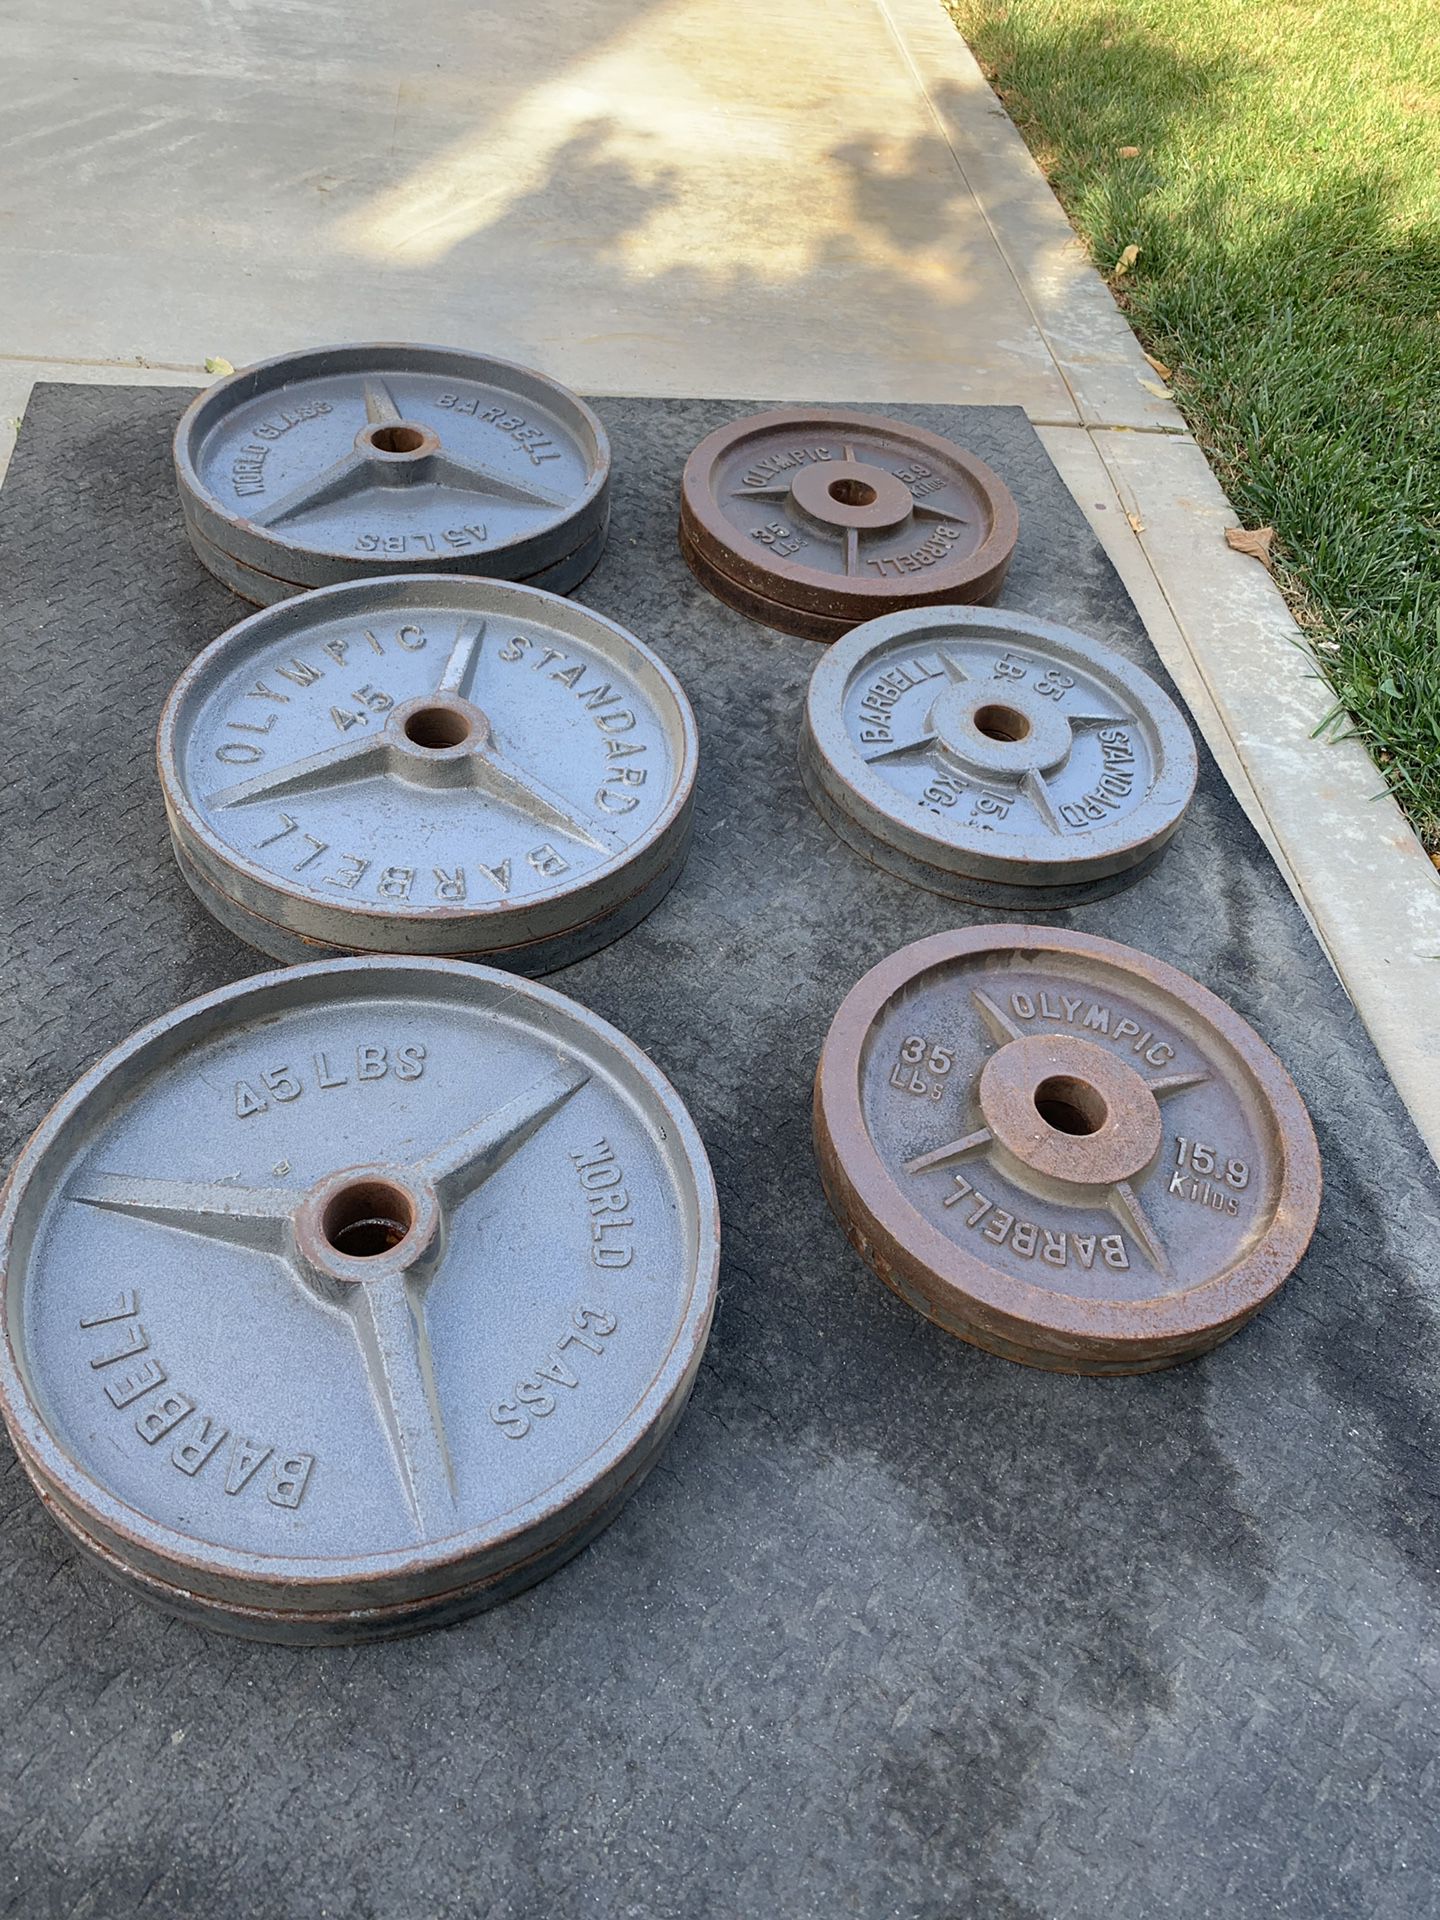 World class Olympic weights plates